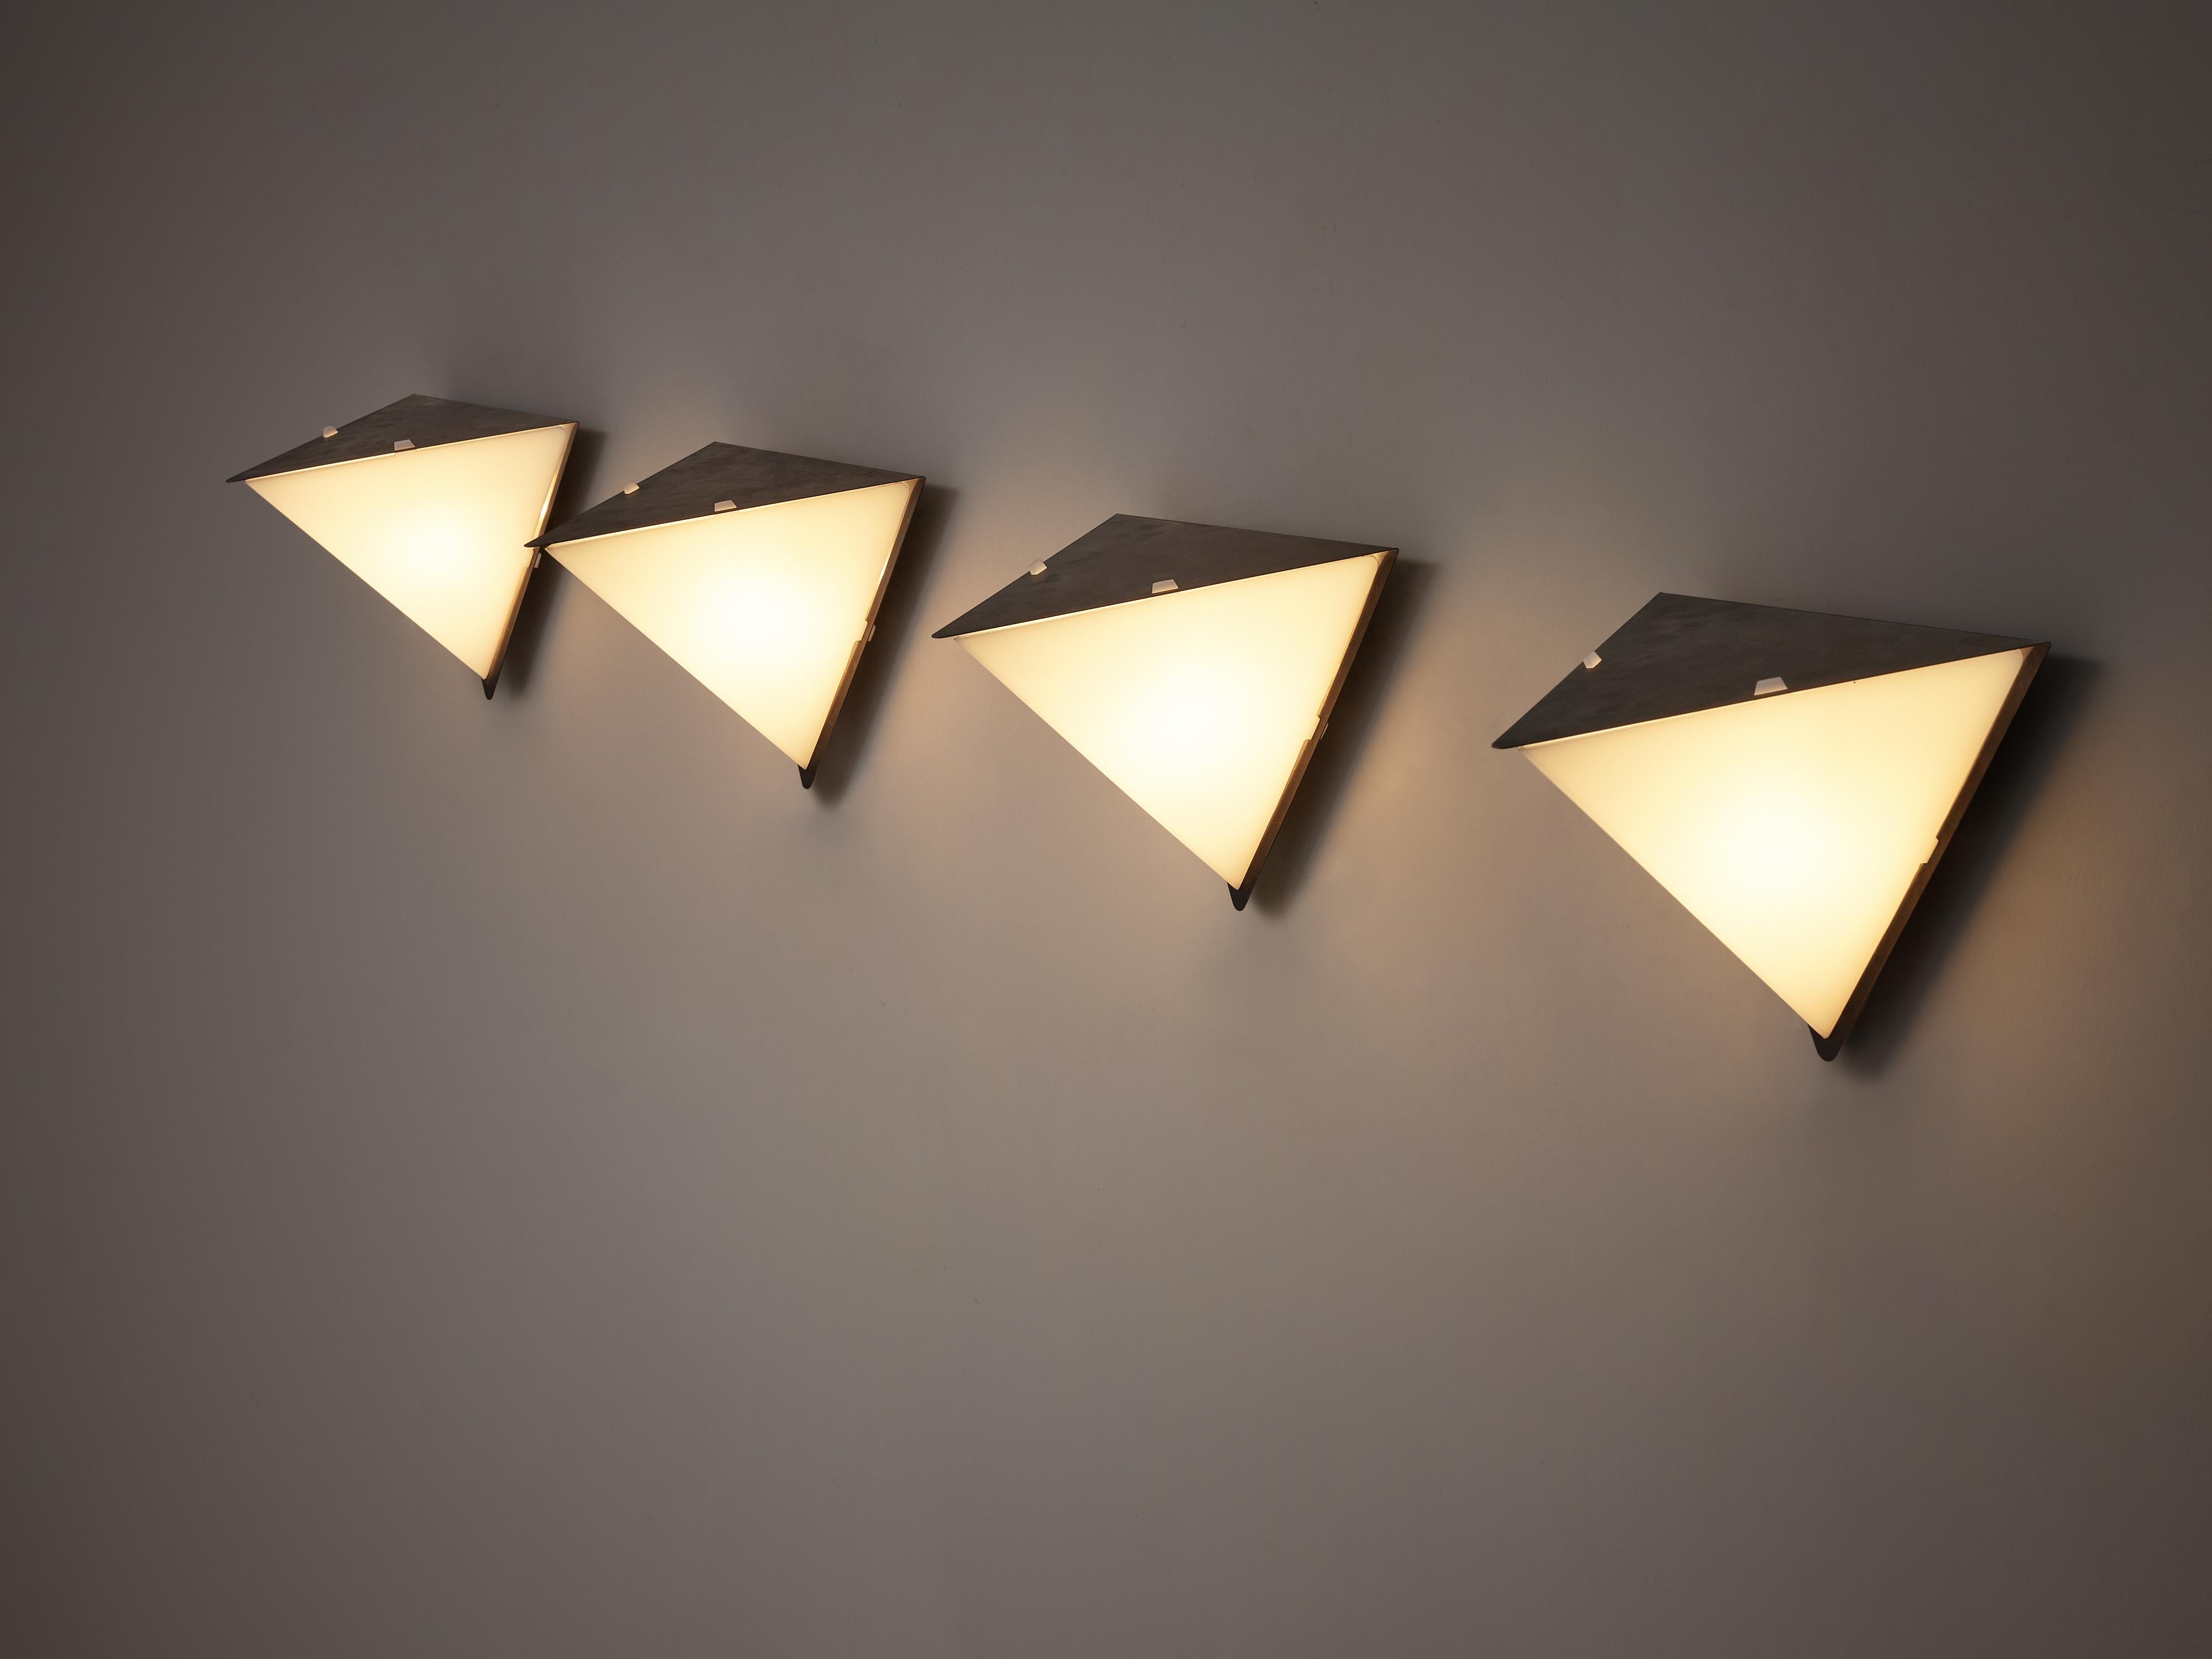 Hans-Agne Jakobsson, wall lights, copper, acrylic, Sweden, 1960s

Rare set of wall lights designed by Hans-Ange Jakobsson. The shape of these wall lights consists of multiple triangles. Firstly, two connected triangles in copper form the wall